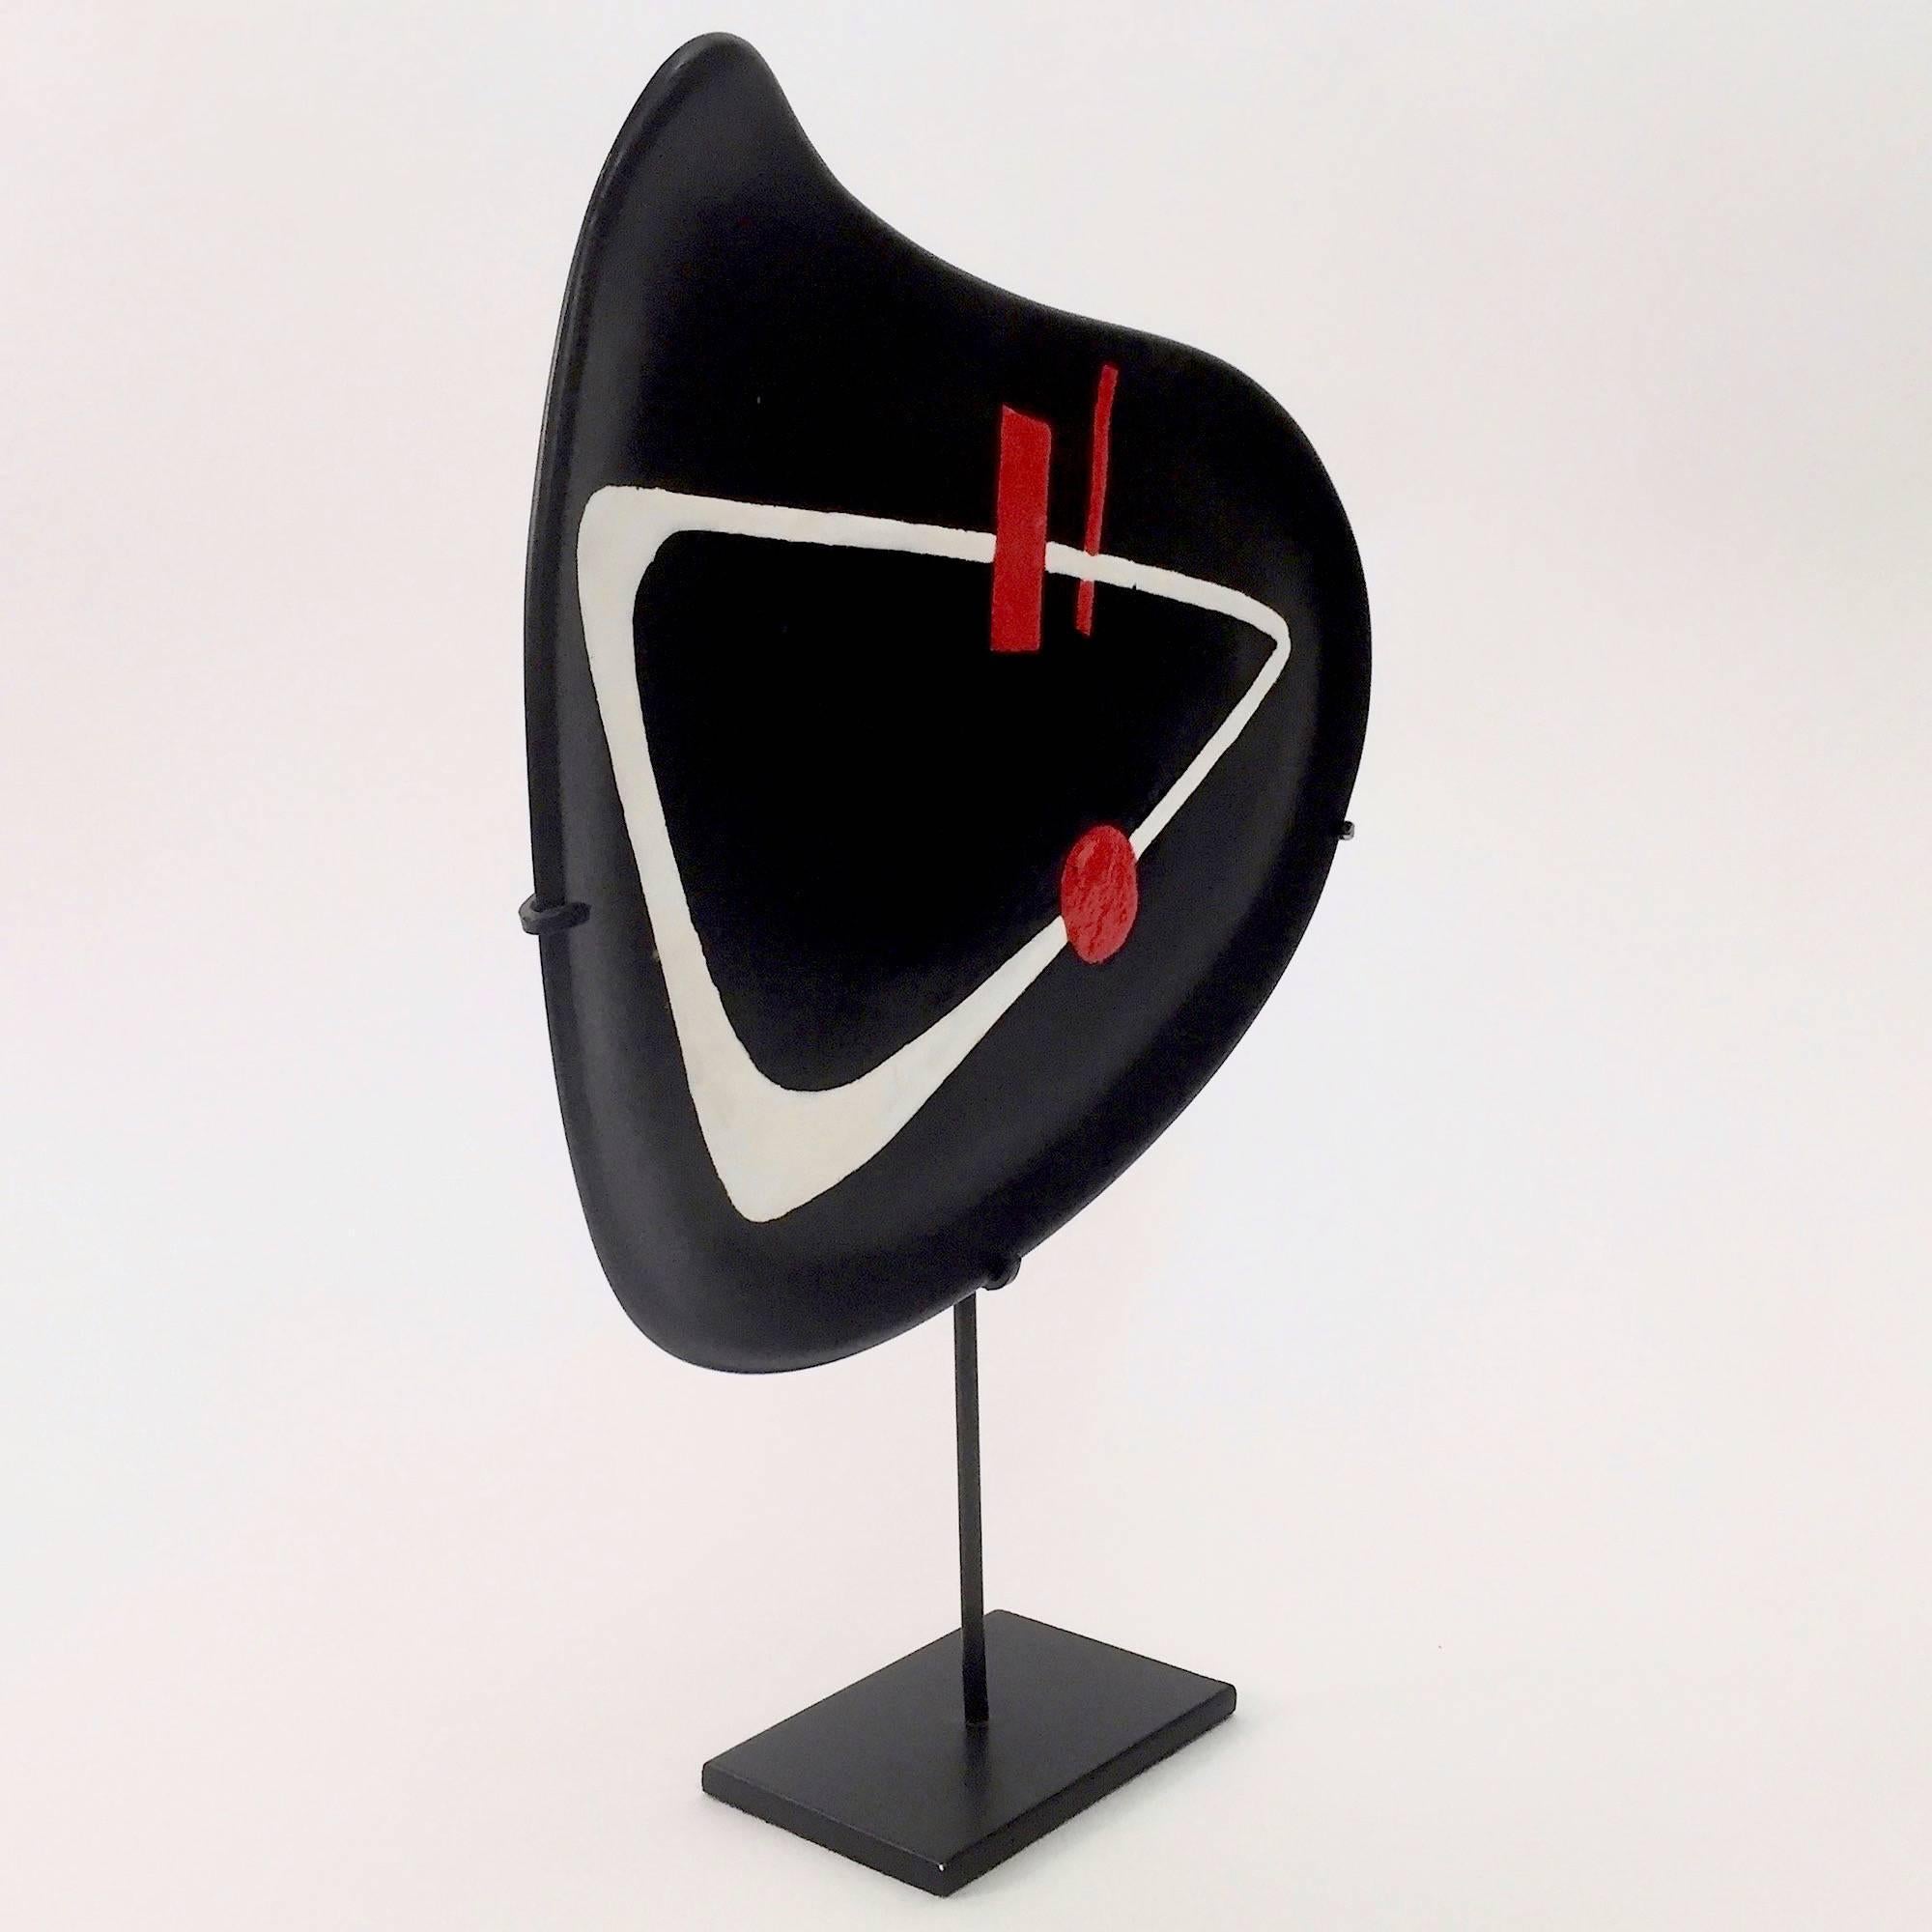 An organic shaped earthenware dish glazed in black with abstract and geometric decoration engraved and over-glazed in shinny white and red. 

Typical Mid-Century Modern abstract and geometric design, reminiscent of Joan Miro´ or Calder mobiles